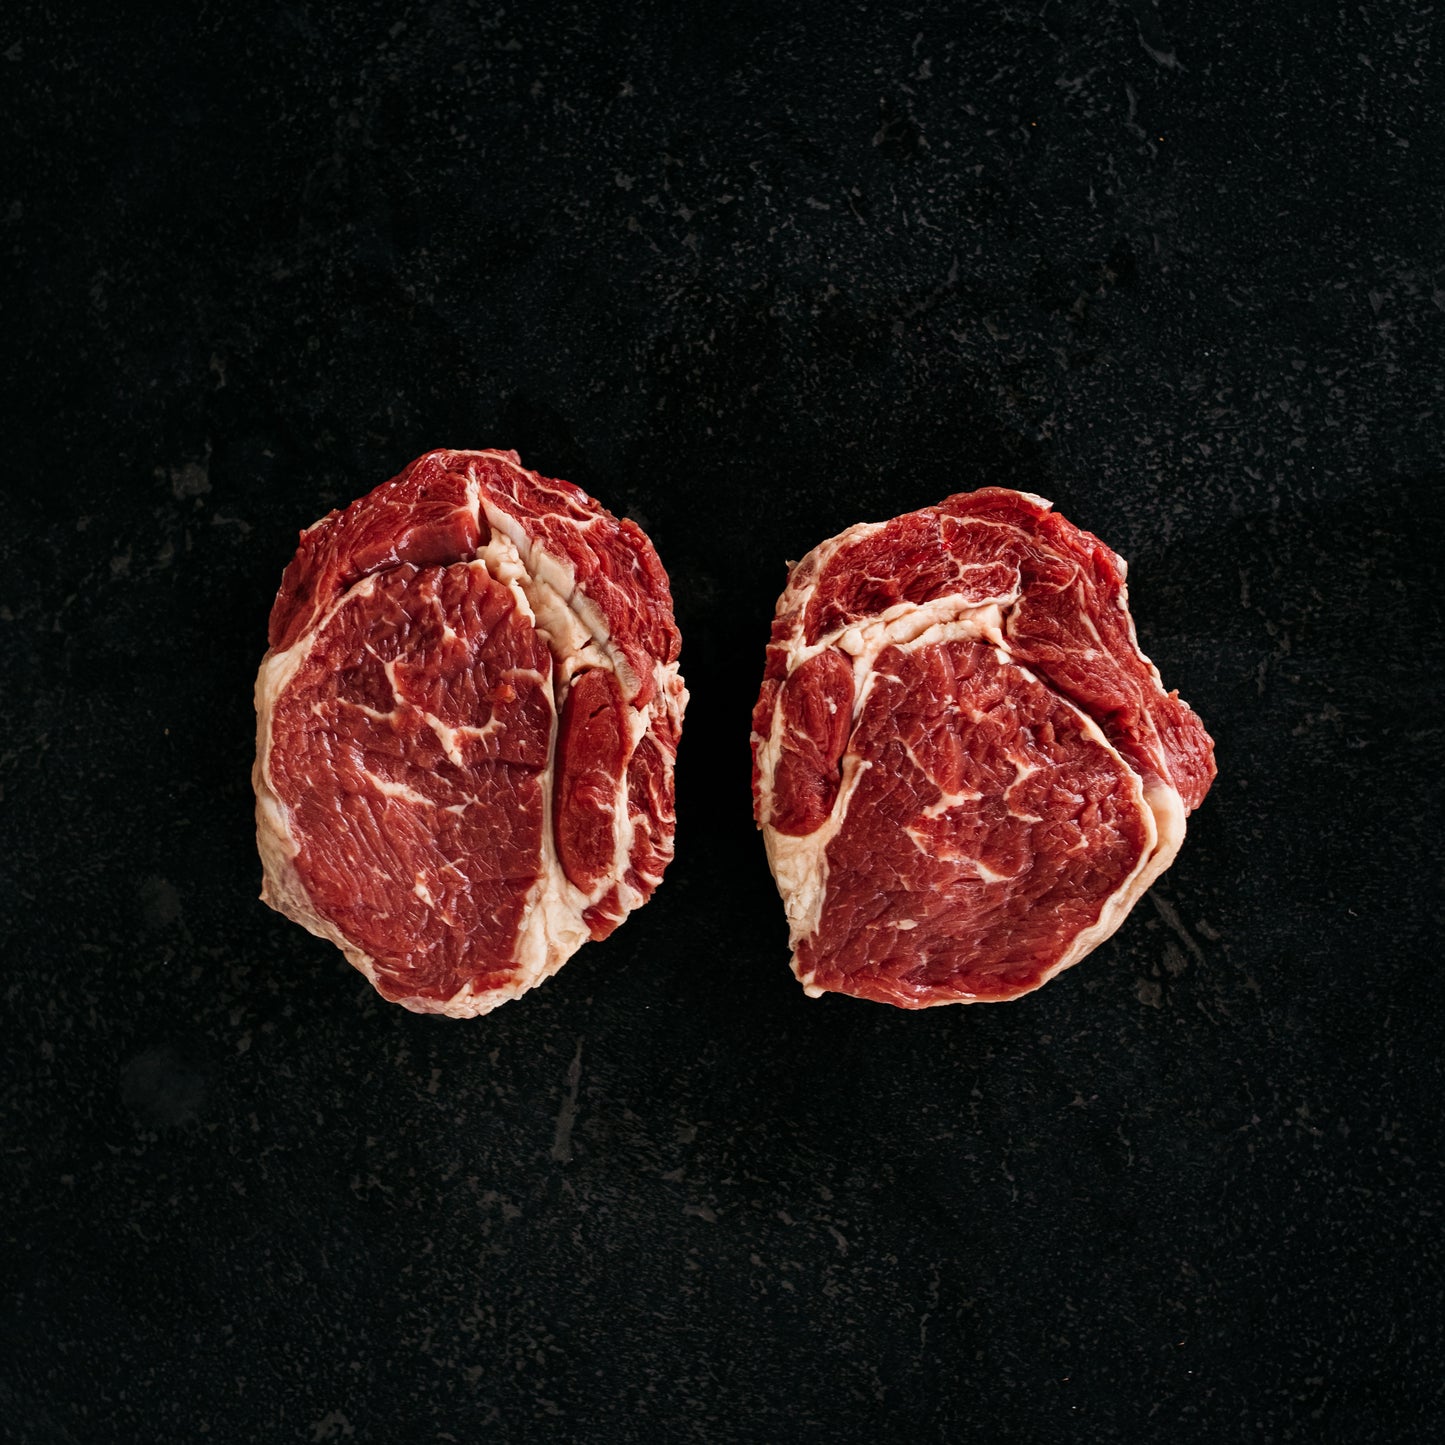 Beef Scotch Fillet (Cube Roll) Budget 2/tray (~250g each)